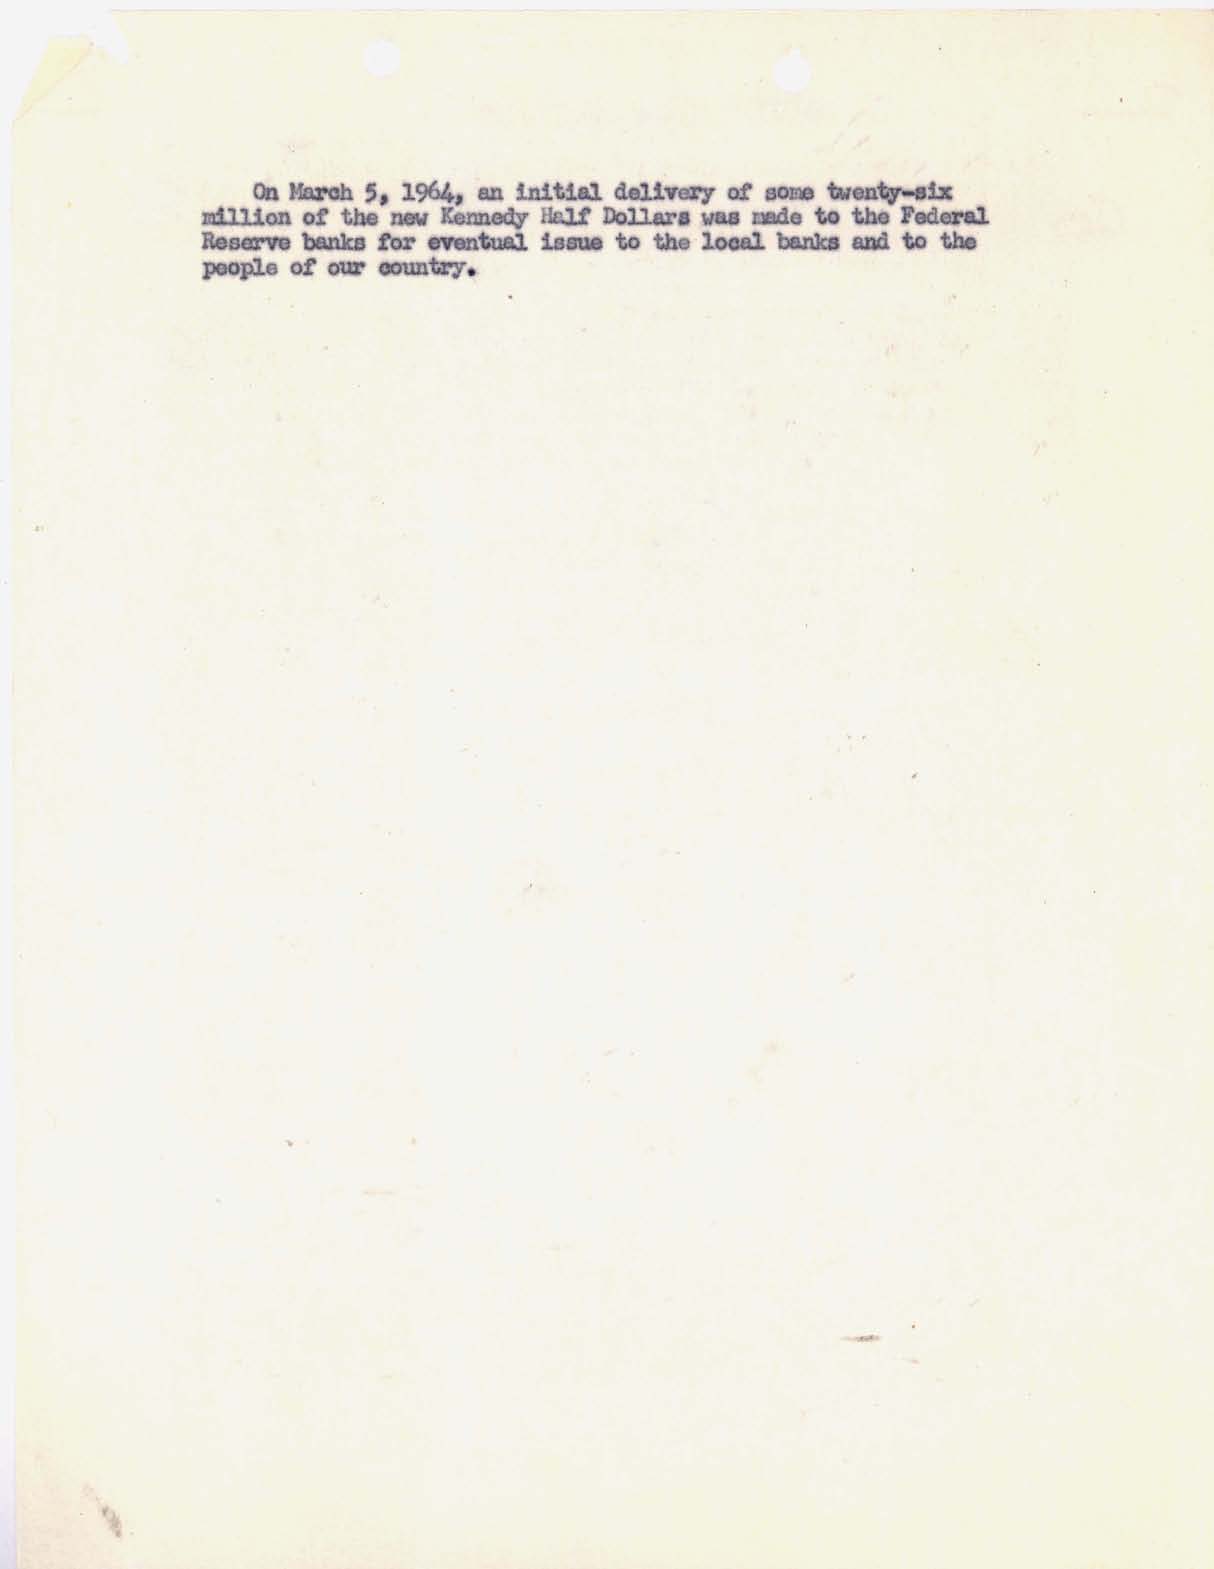 Letter to Director Adams: Kennedy Half Dollar Production, Page 4